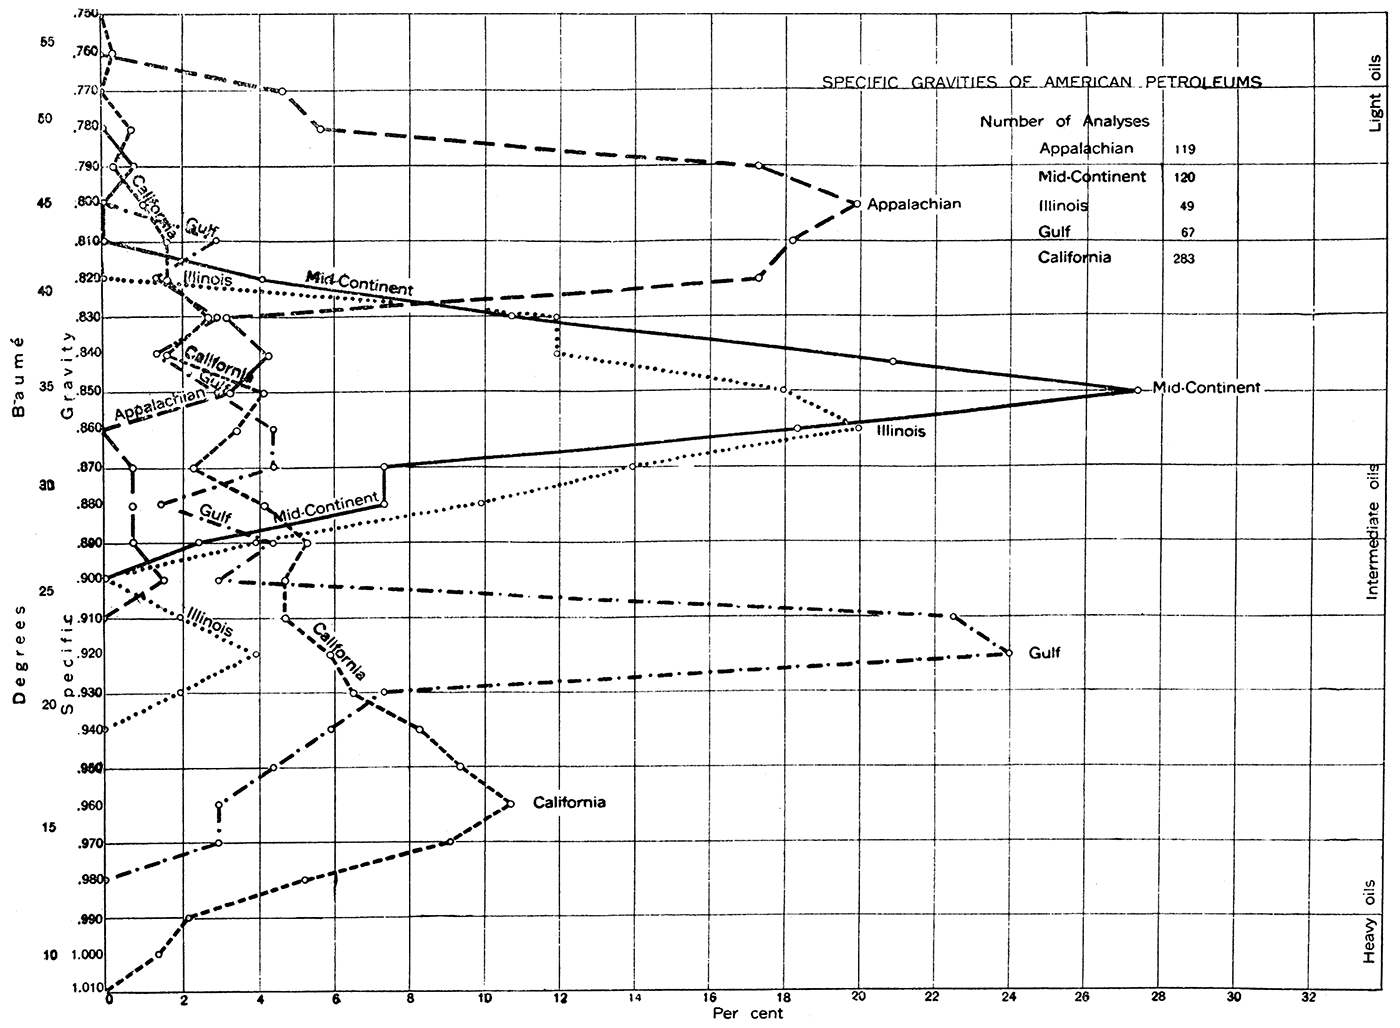 Specific gravities of American petroleums.